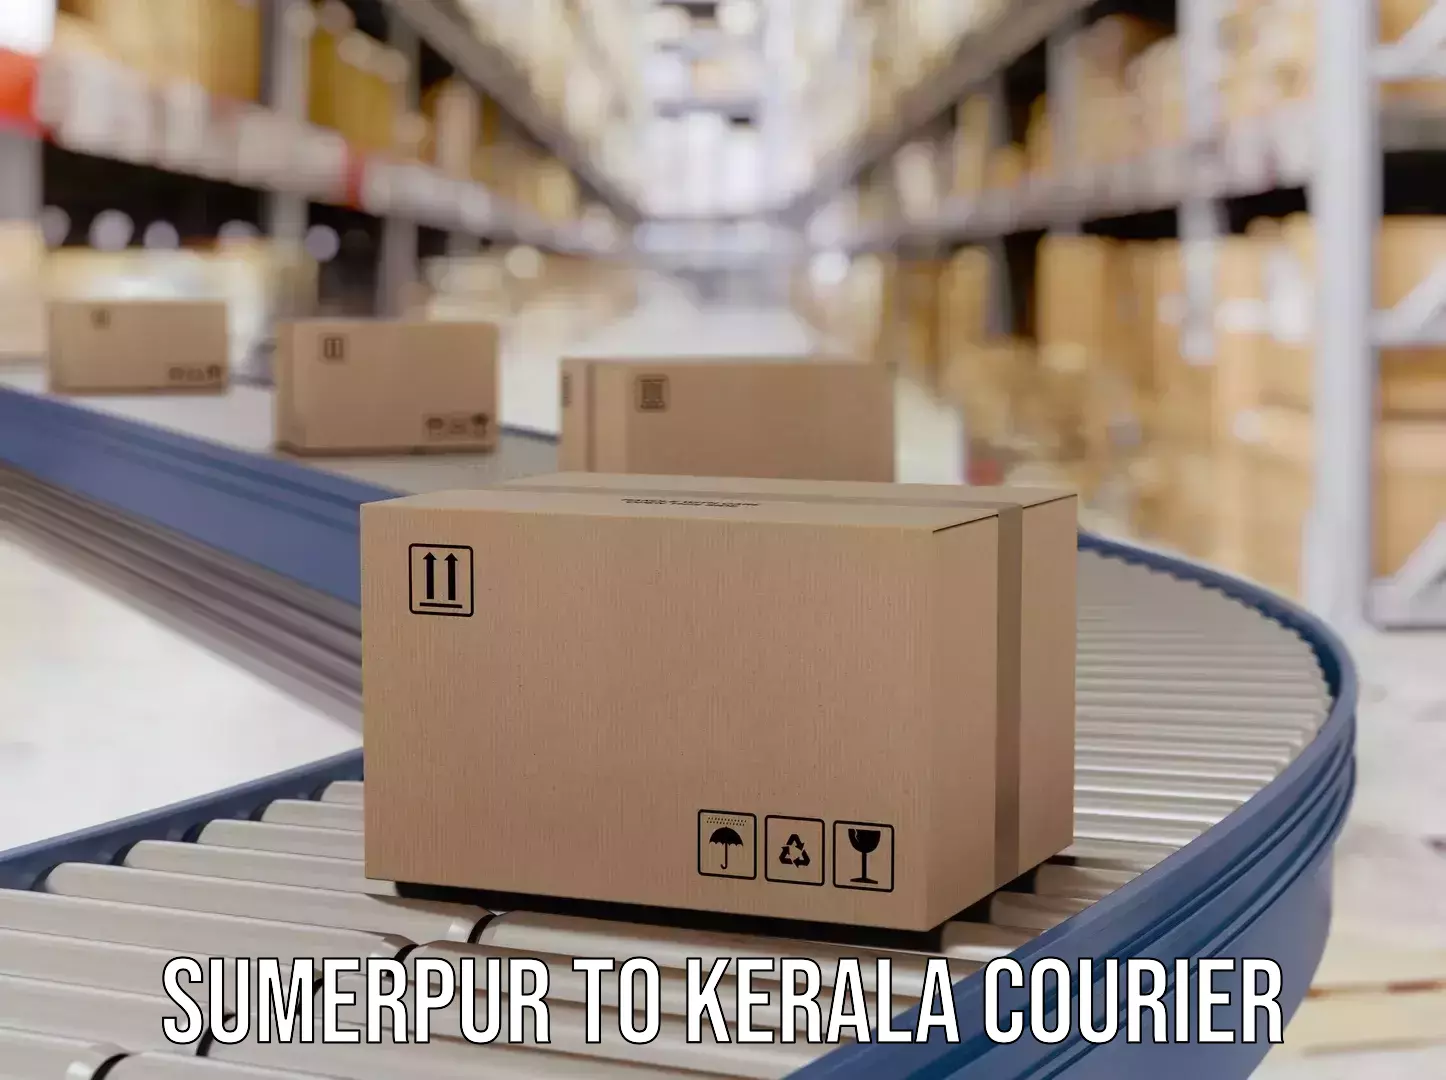 Express logistics providers Sumerpur to Cochin University of Science and Technology